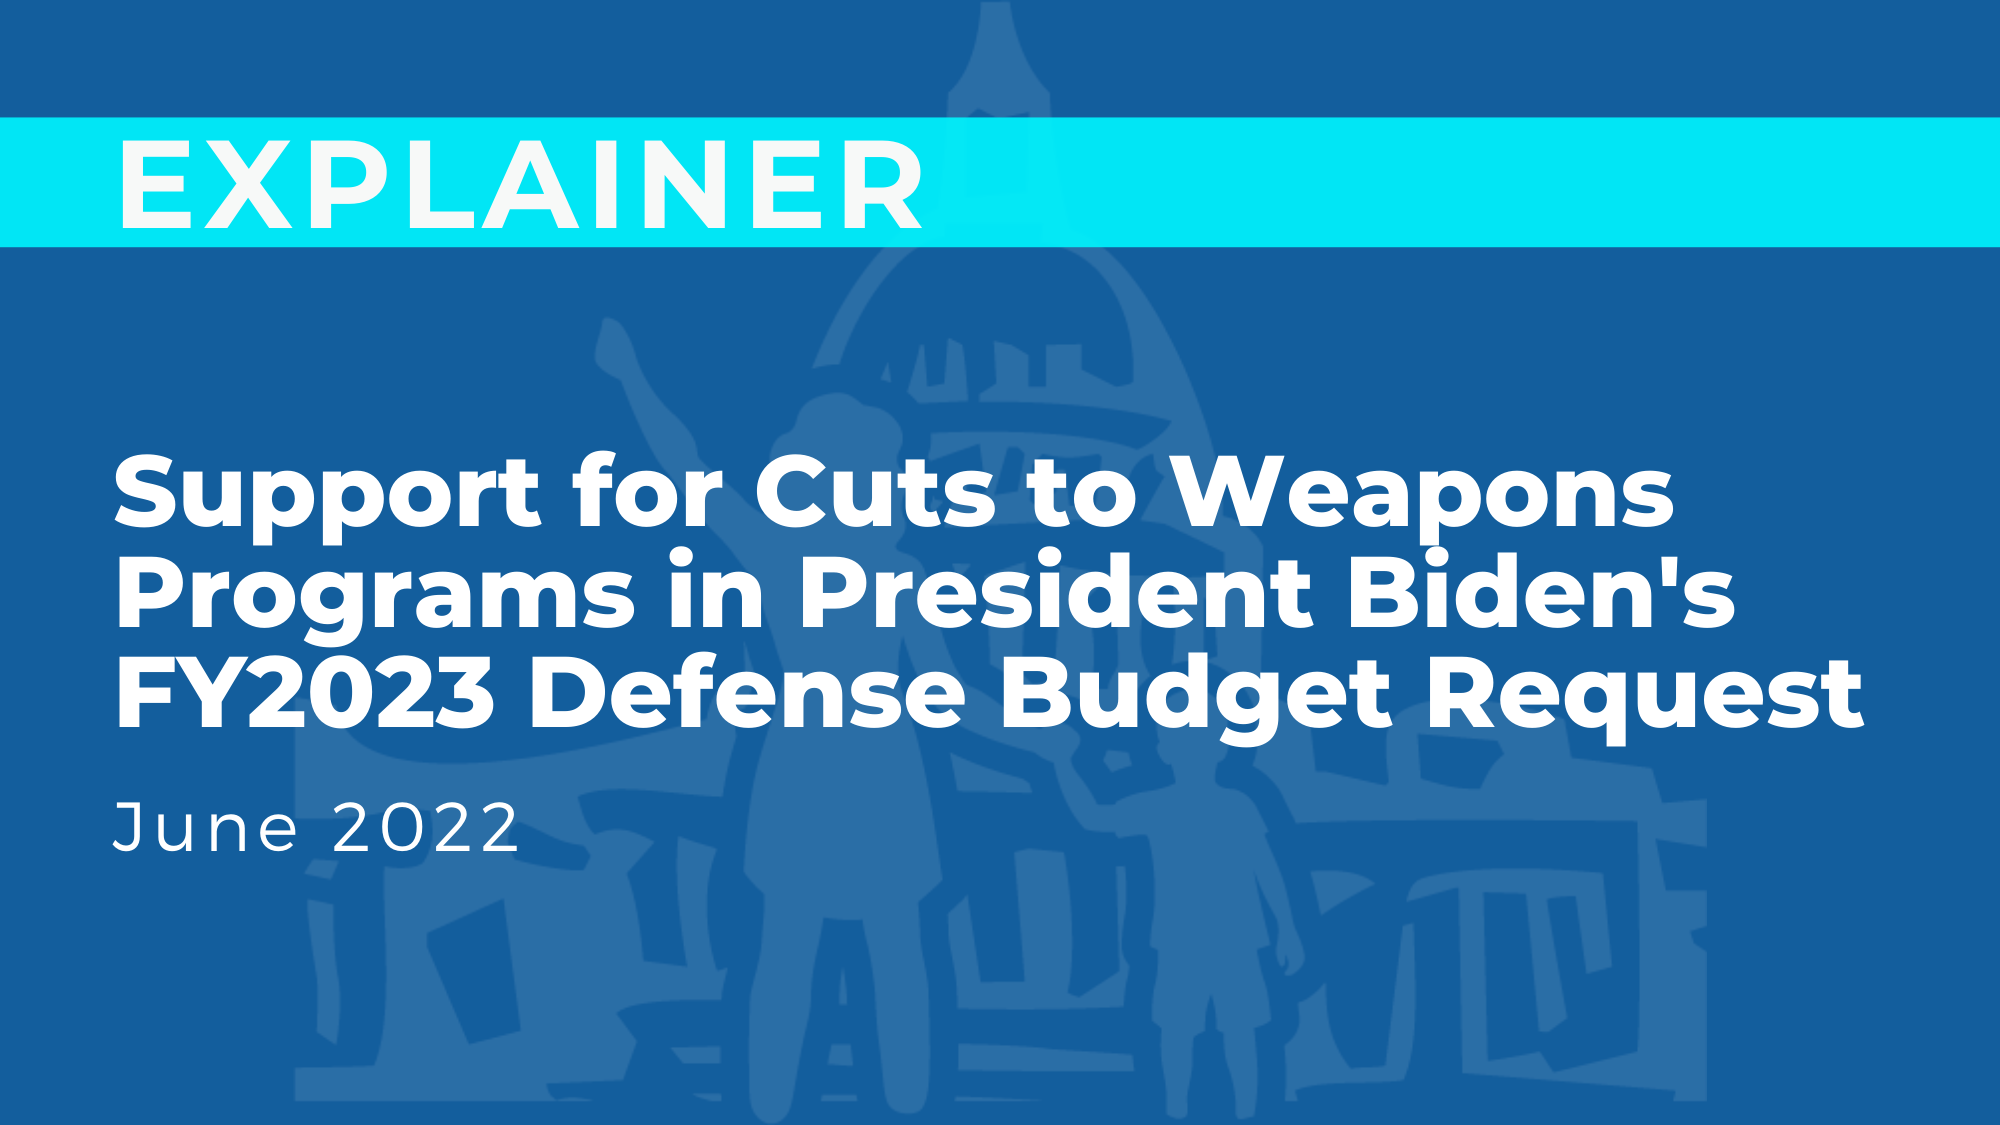 Support for Cuts to Weapons Programs in President Biden's FY2023 Defense Budget Request